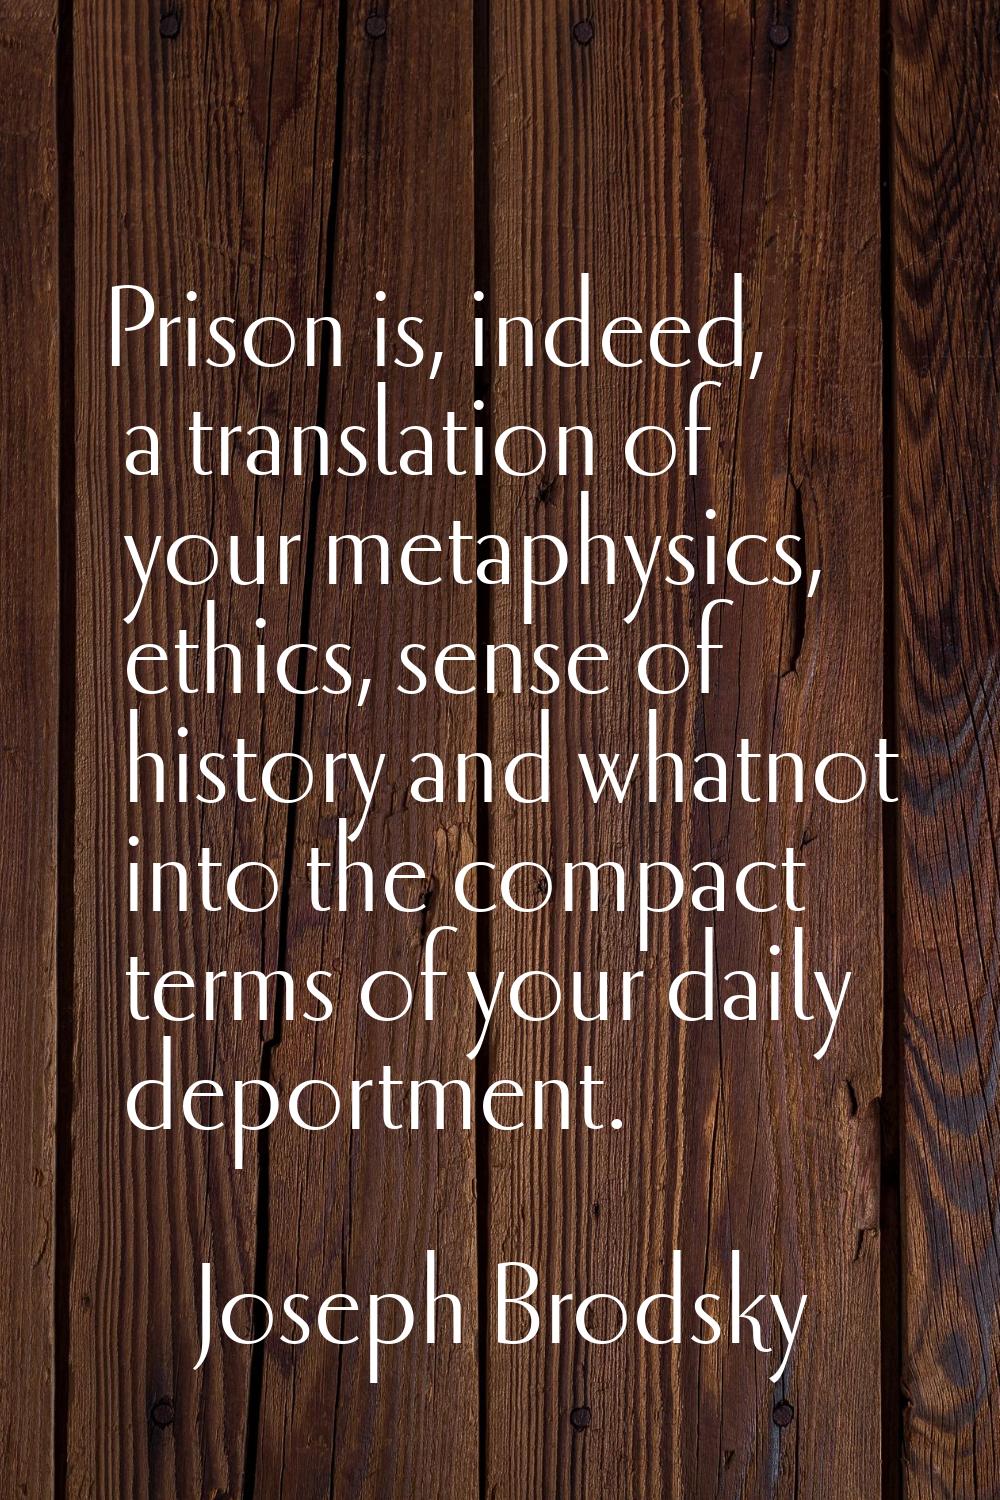 Prison is, indeed, a translation of your metaphysics, ethics, sense of history and whatnot into the